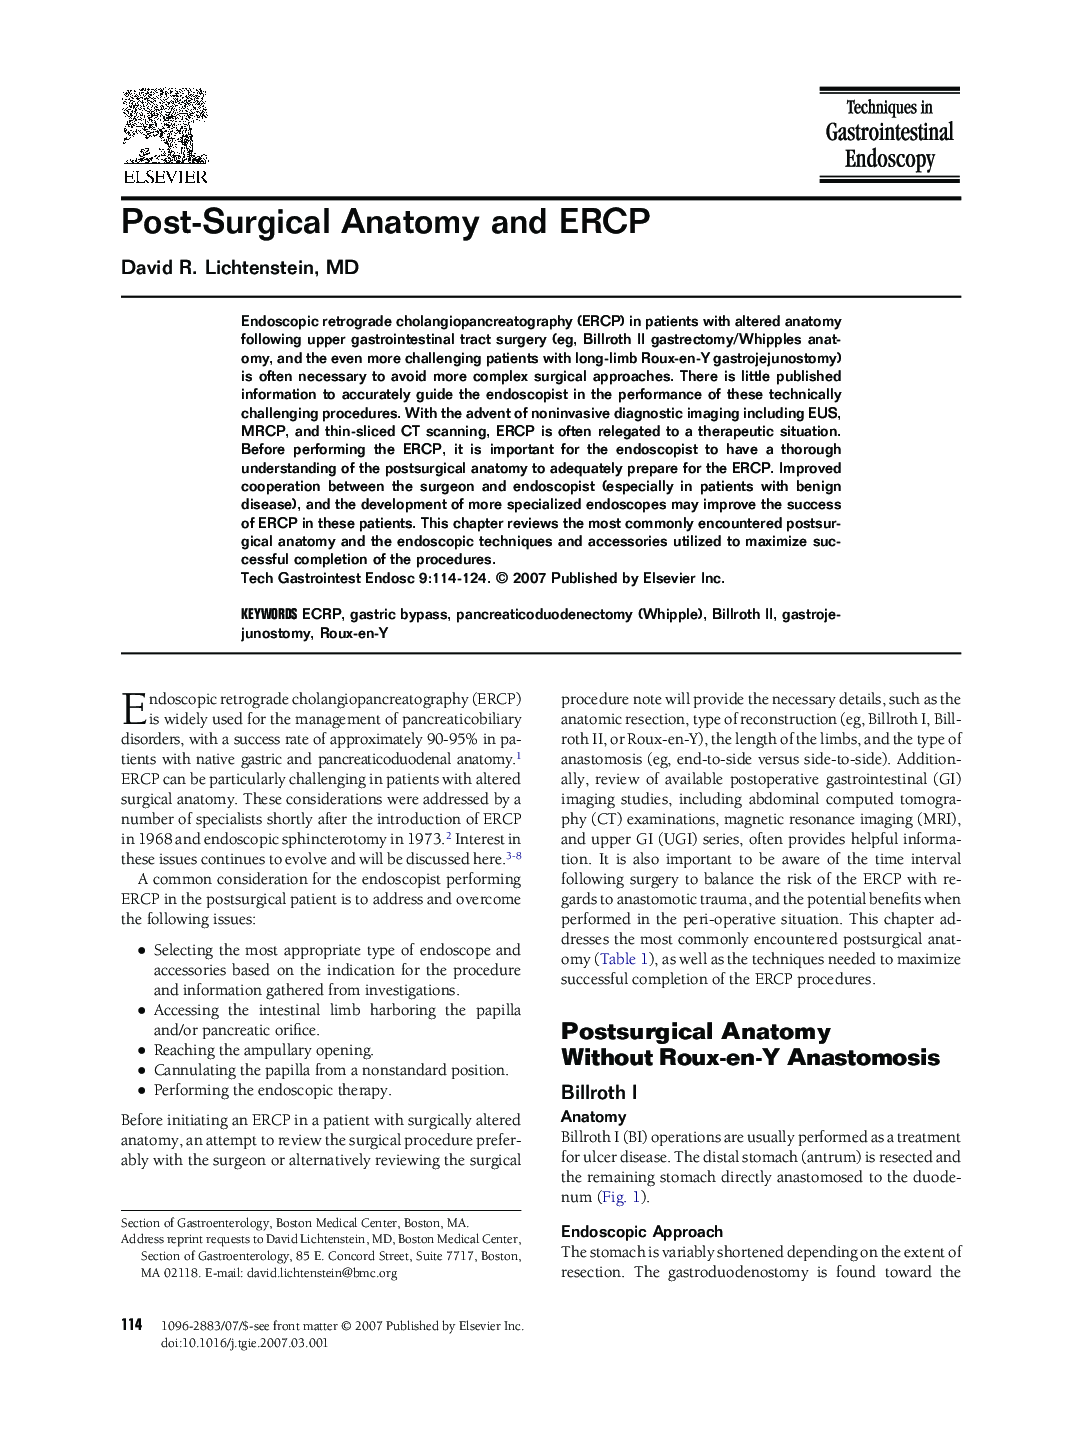 Post-Surgical Anatomy and ERCP